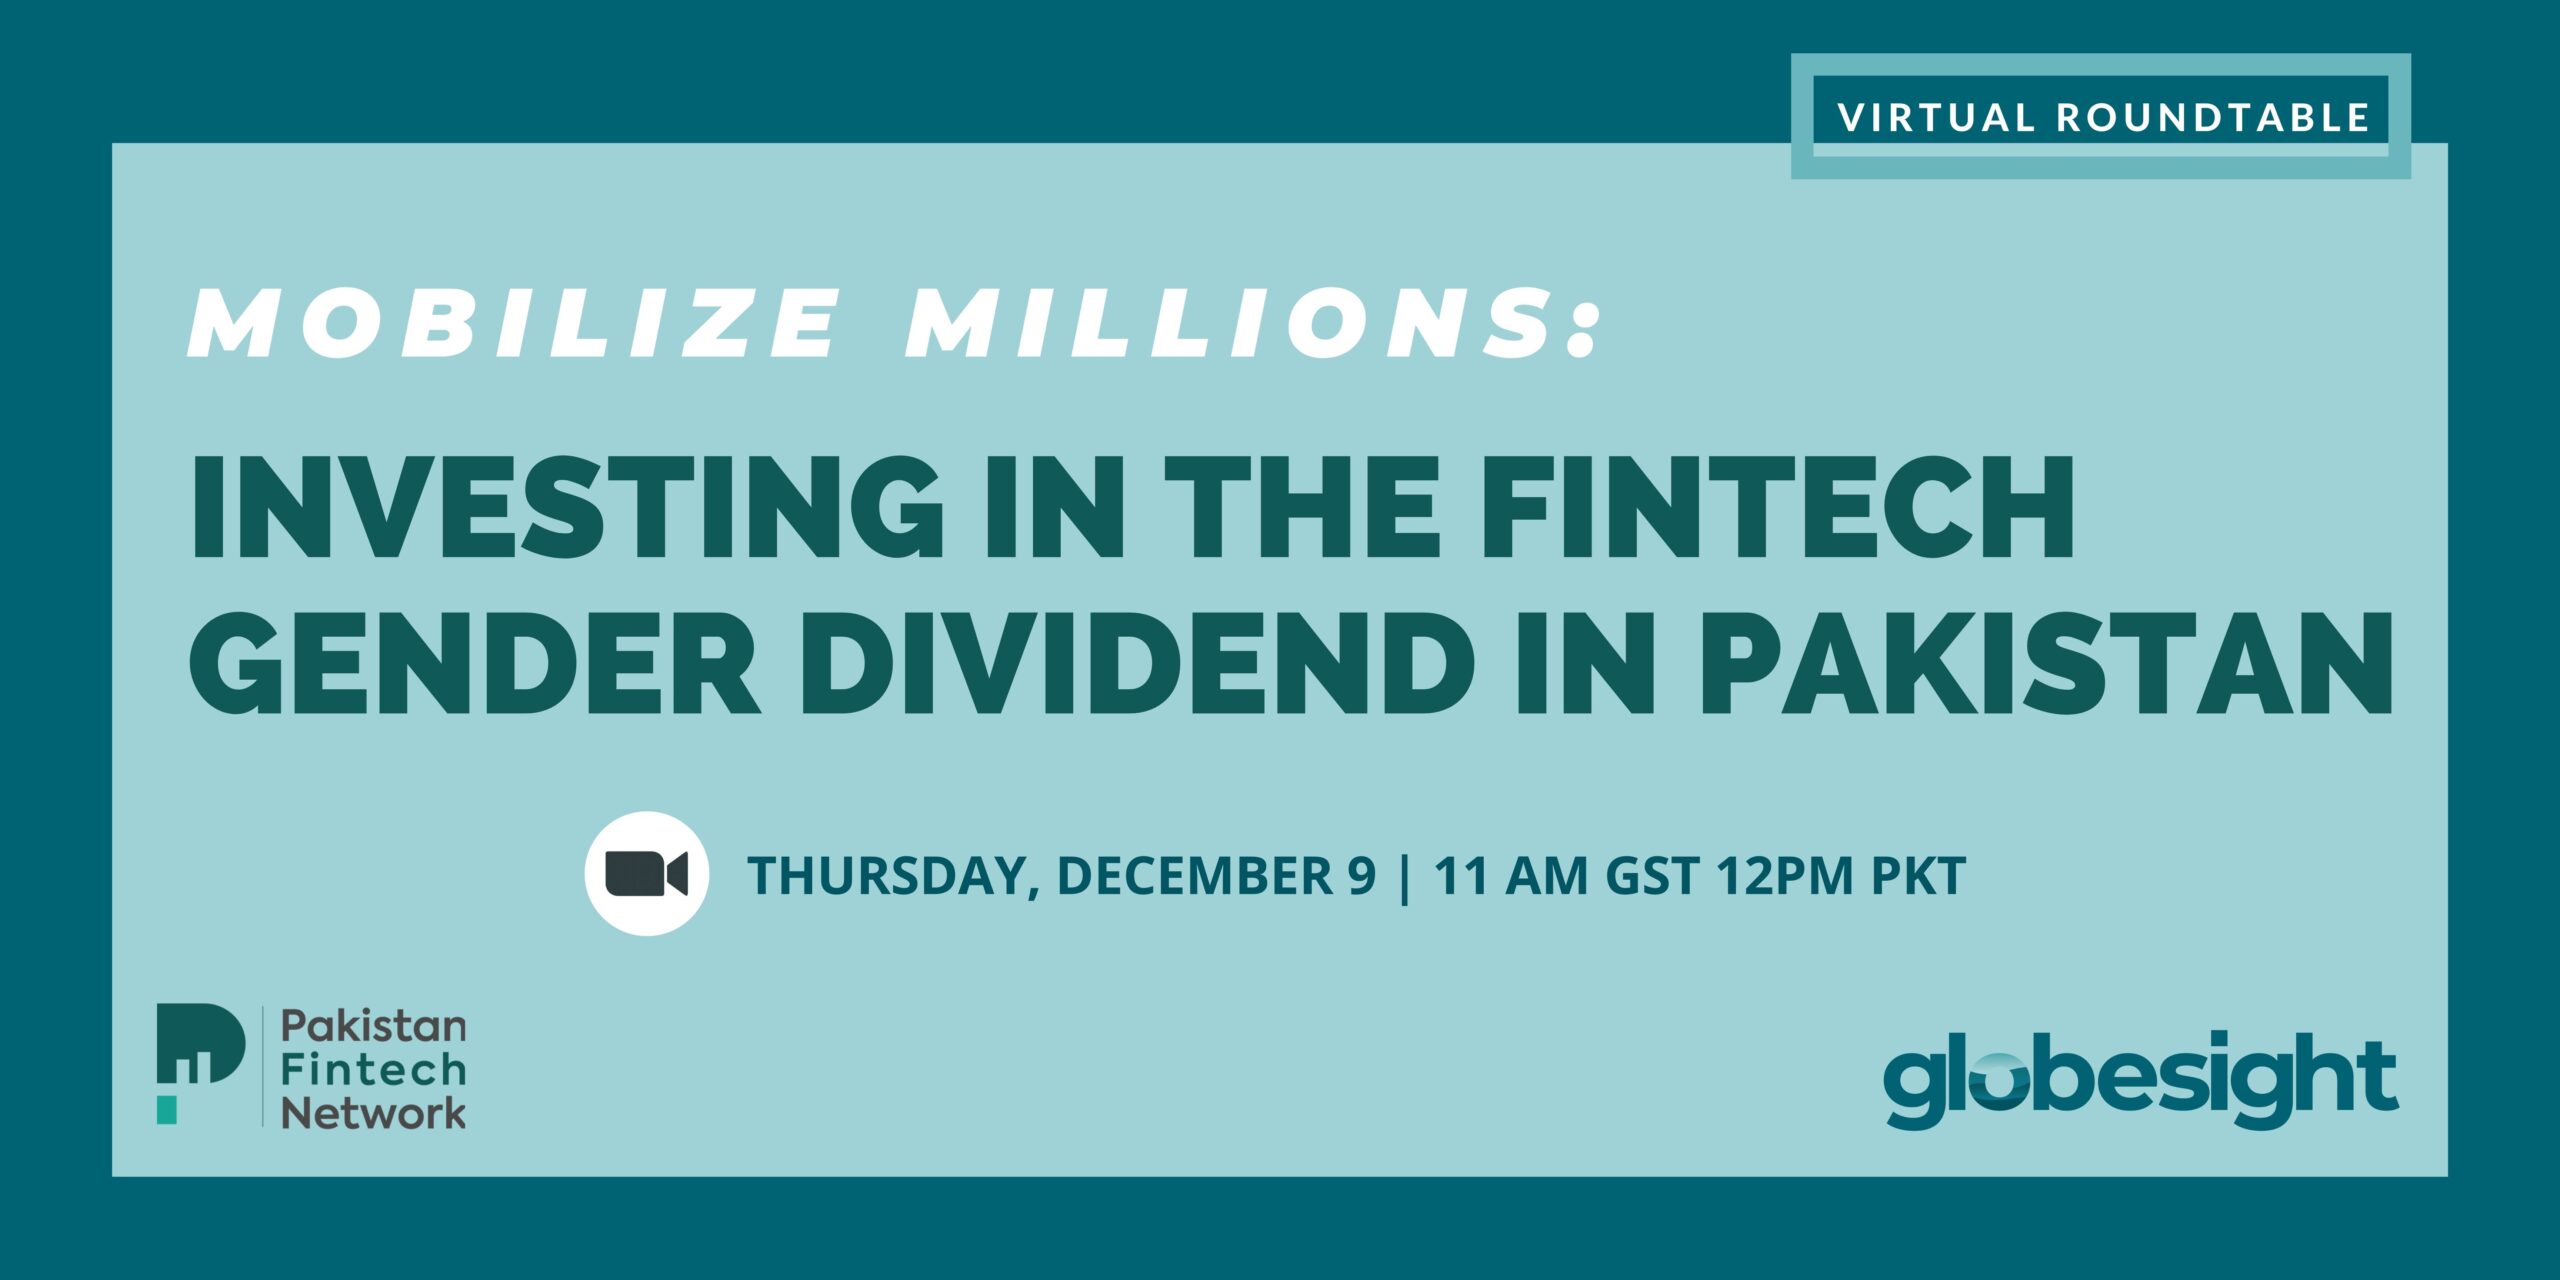 Globesight Hosts ‘Mobilize Millions’ Roundtable on Investing in the Fintech Gender Dividend in Pakistan in Partnership with PFN